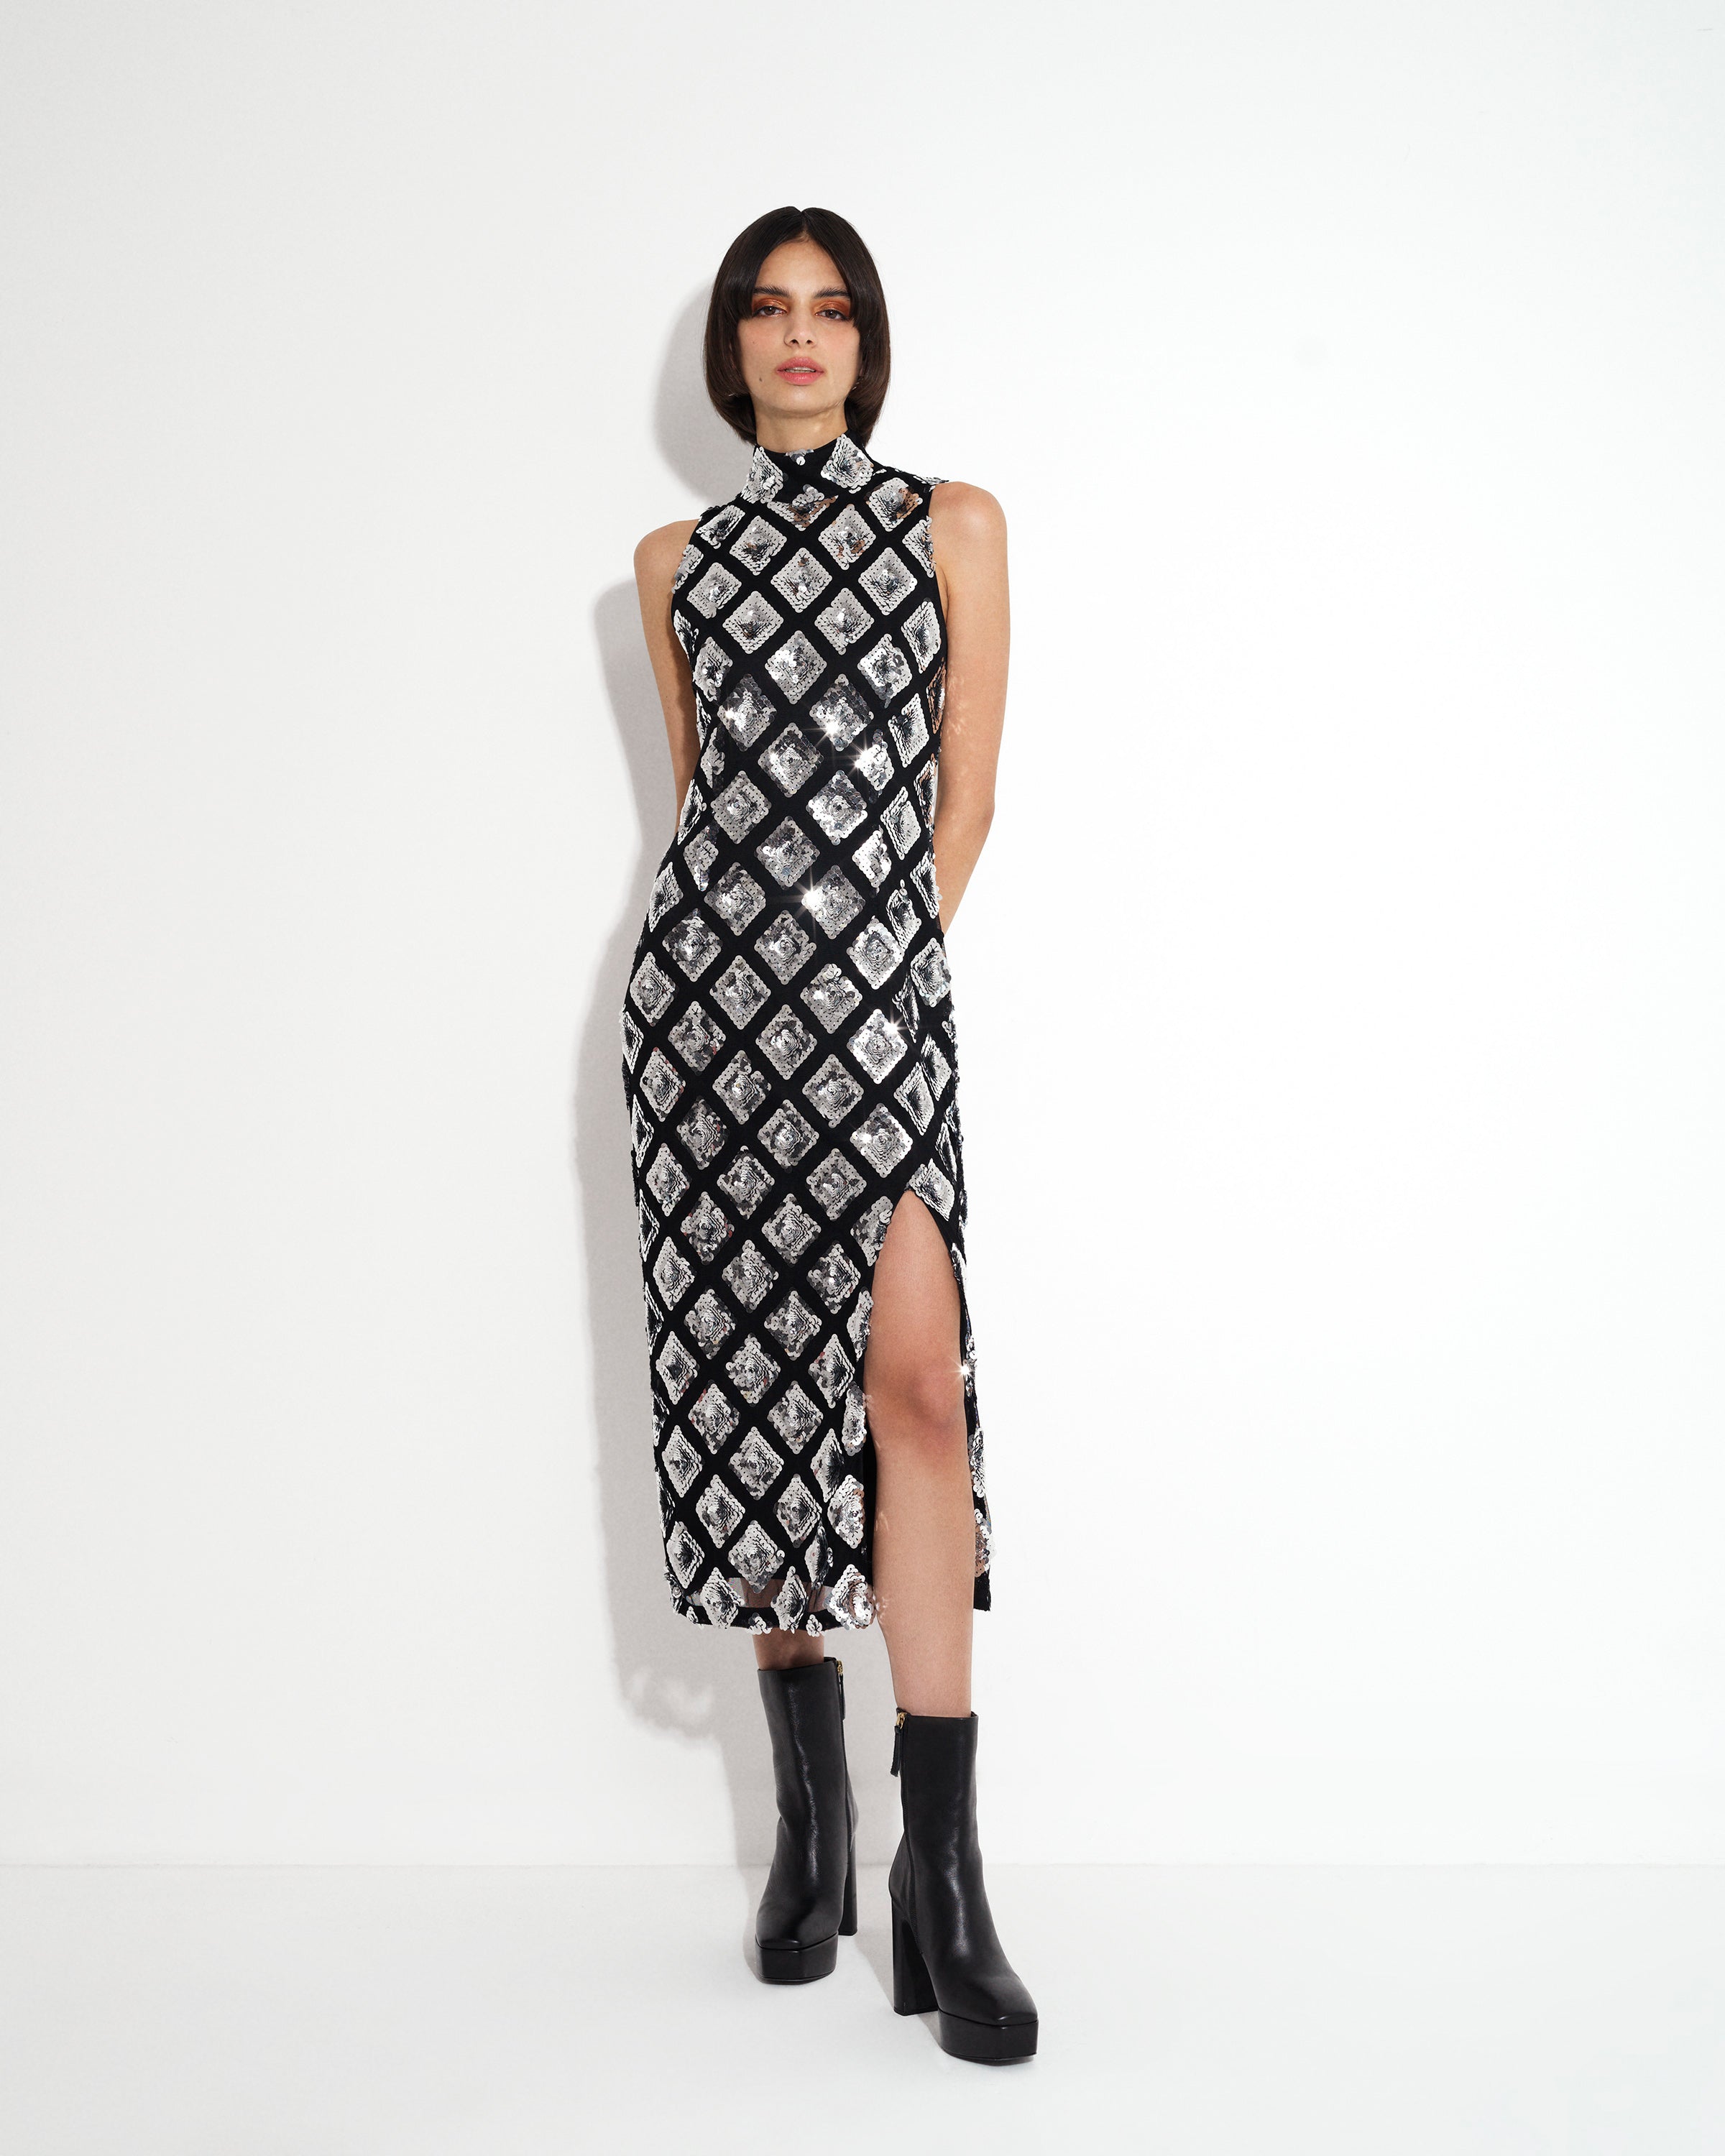 Axel embellished Midi dress | French Connection